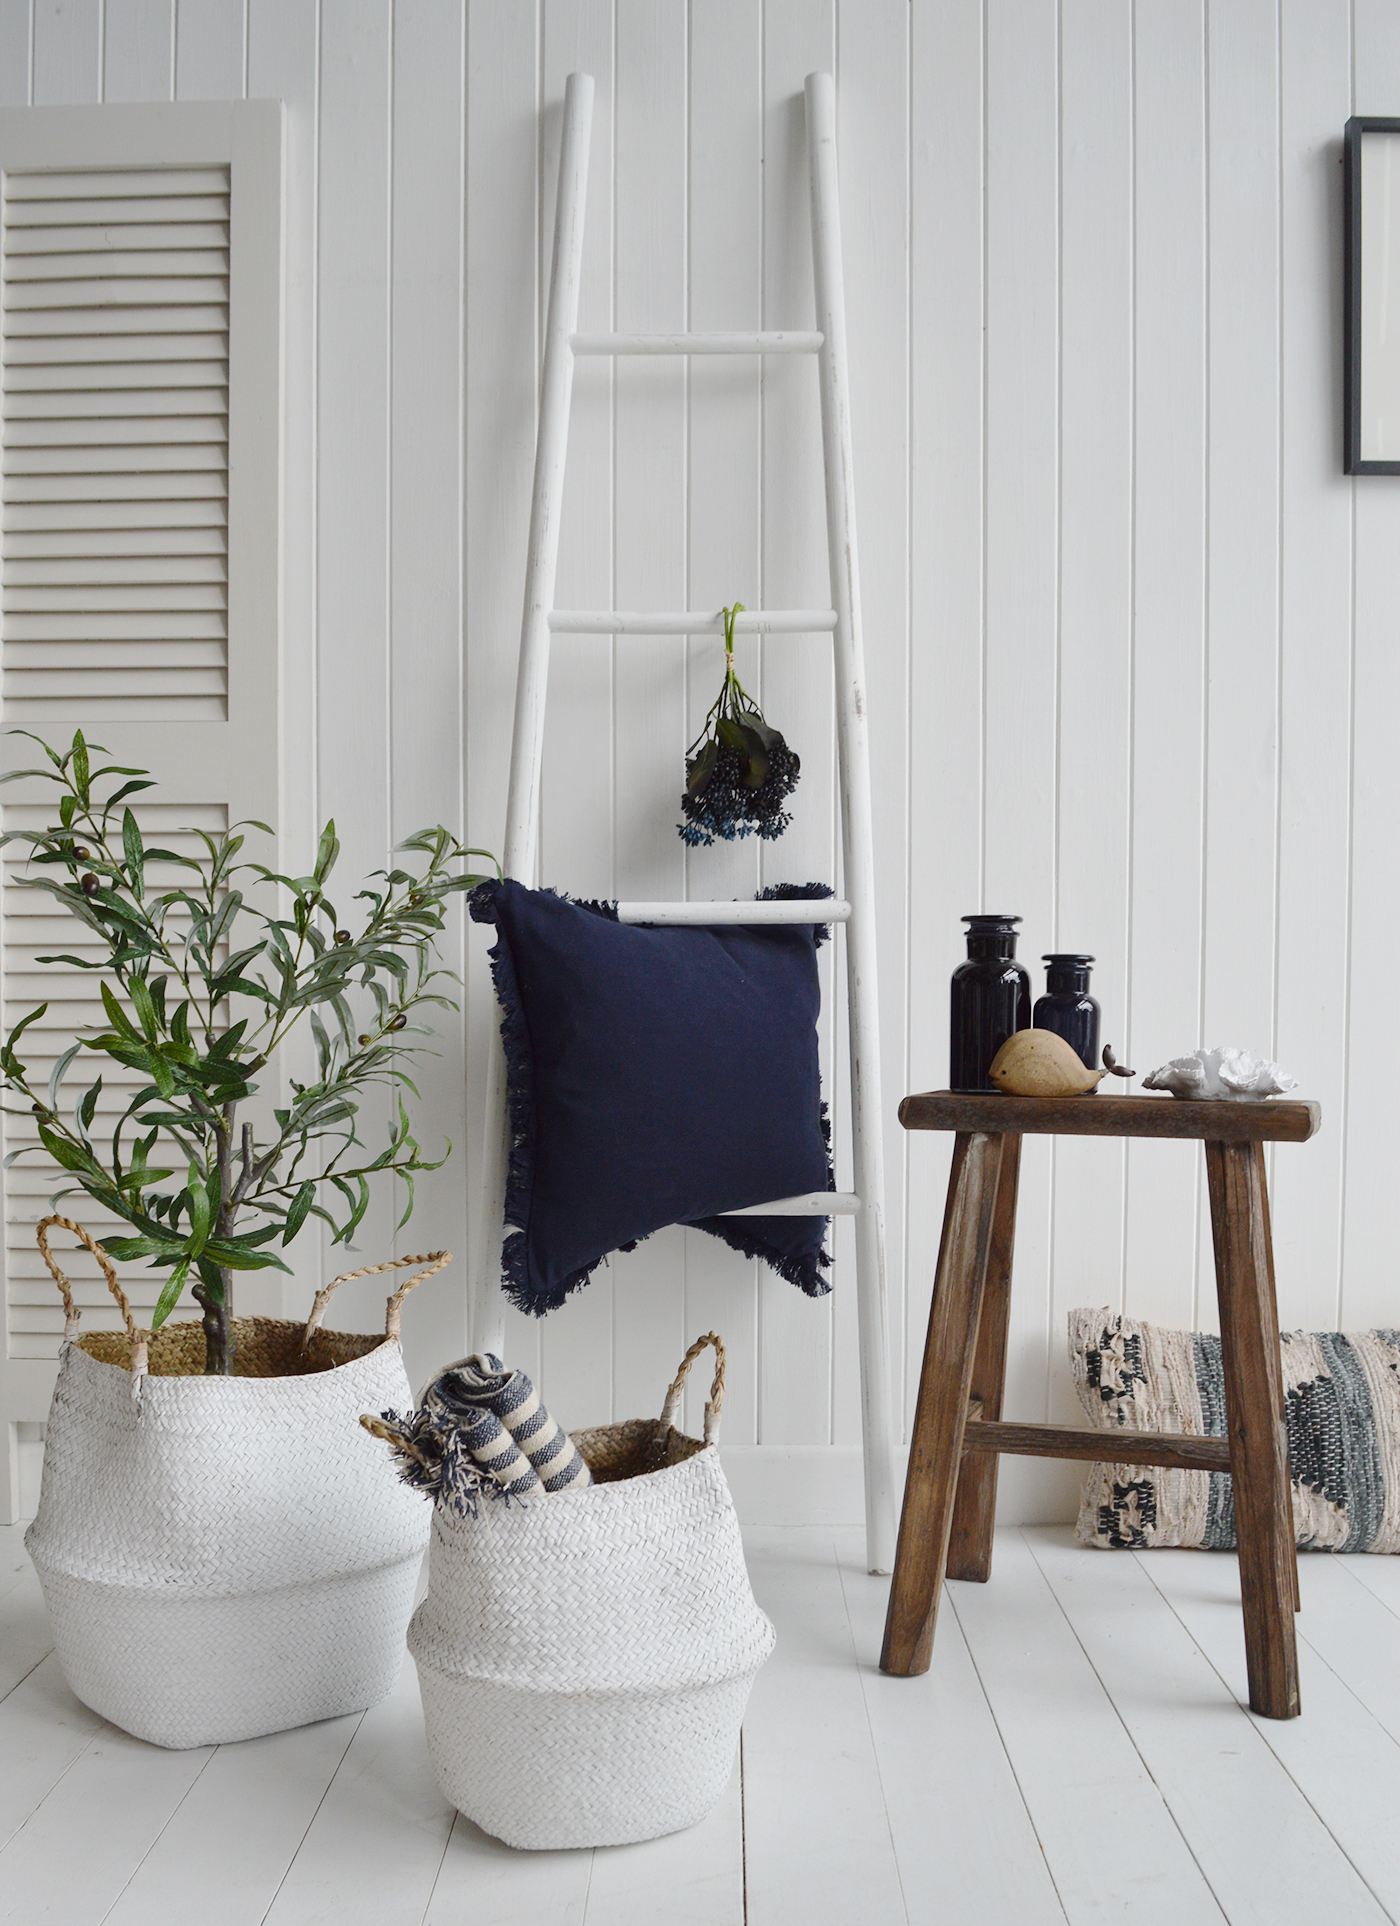 Classic Blue and White Interiors with the Proincetown white ladder against shades of blues in the accessories and cushions with the rustic Georgetown stool